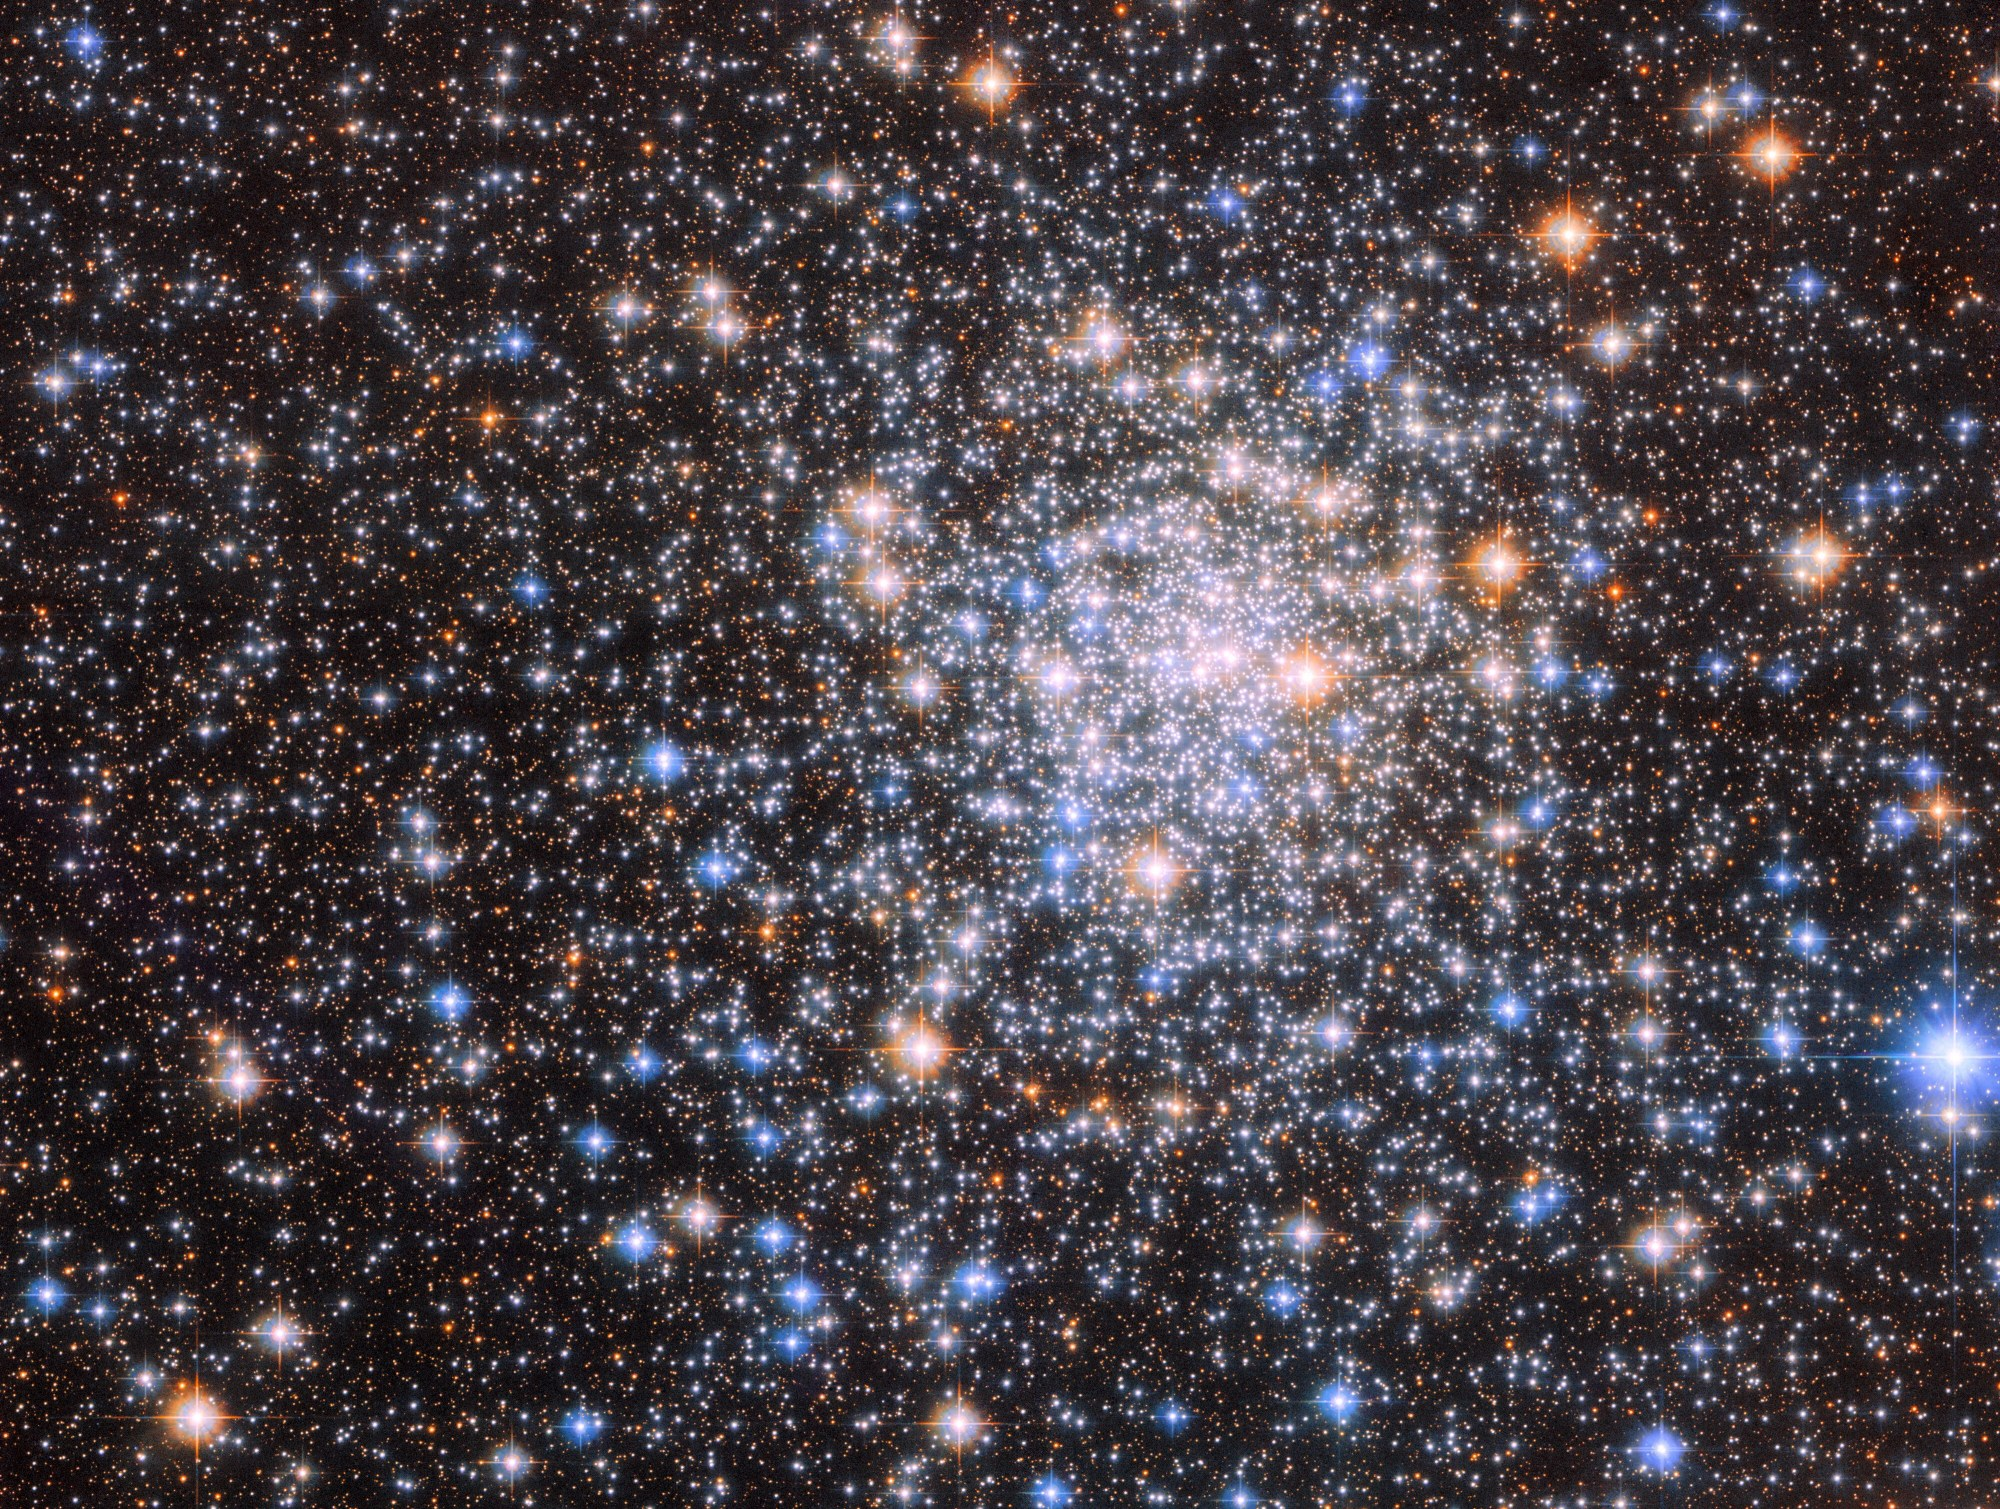 A cluster of stars in warm and cool colors. The whole view is filled with small stars, which become much denser and brighter around a core just right of center. Most of the stars are small, but some are larger with a round, brightly colored glow and four sharp diffraction spikes. Behind the stars, a dark background can be seen.